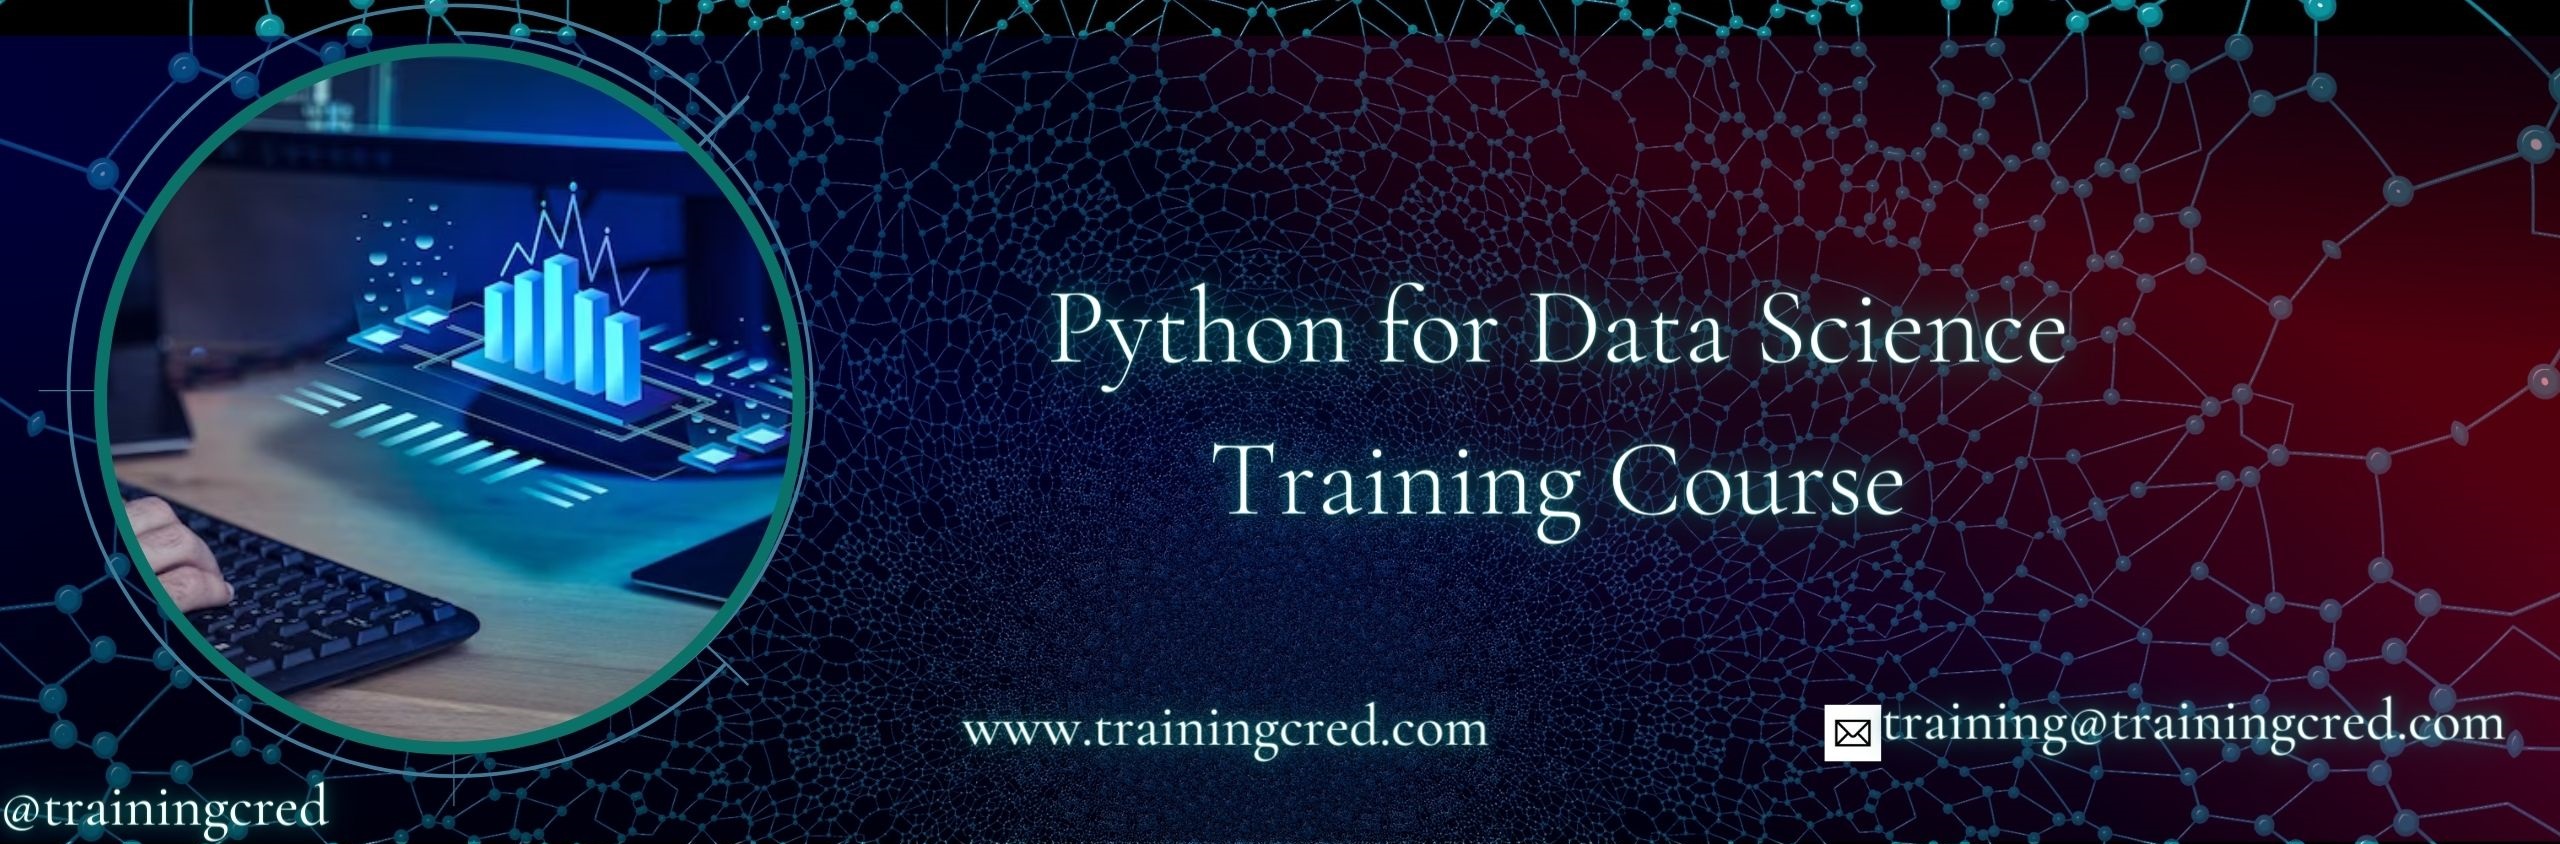 Python for Data Science Training